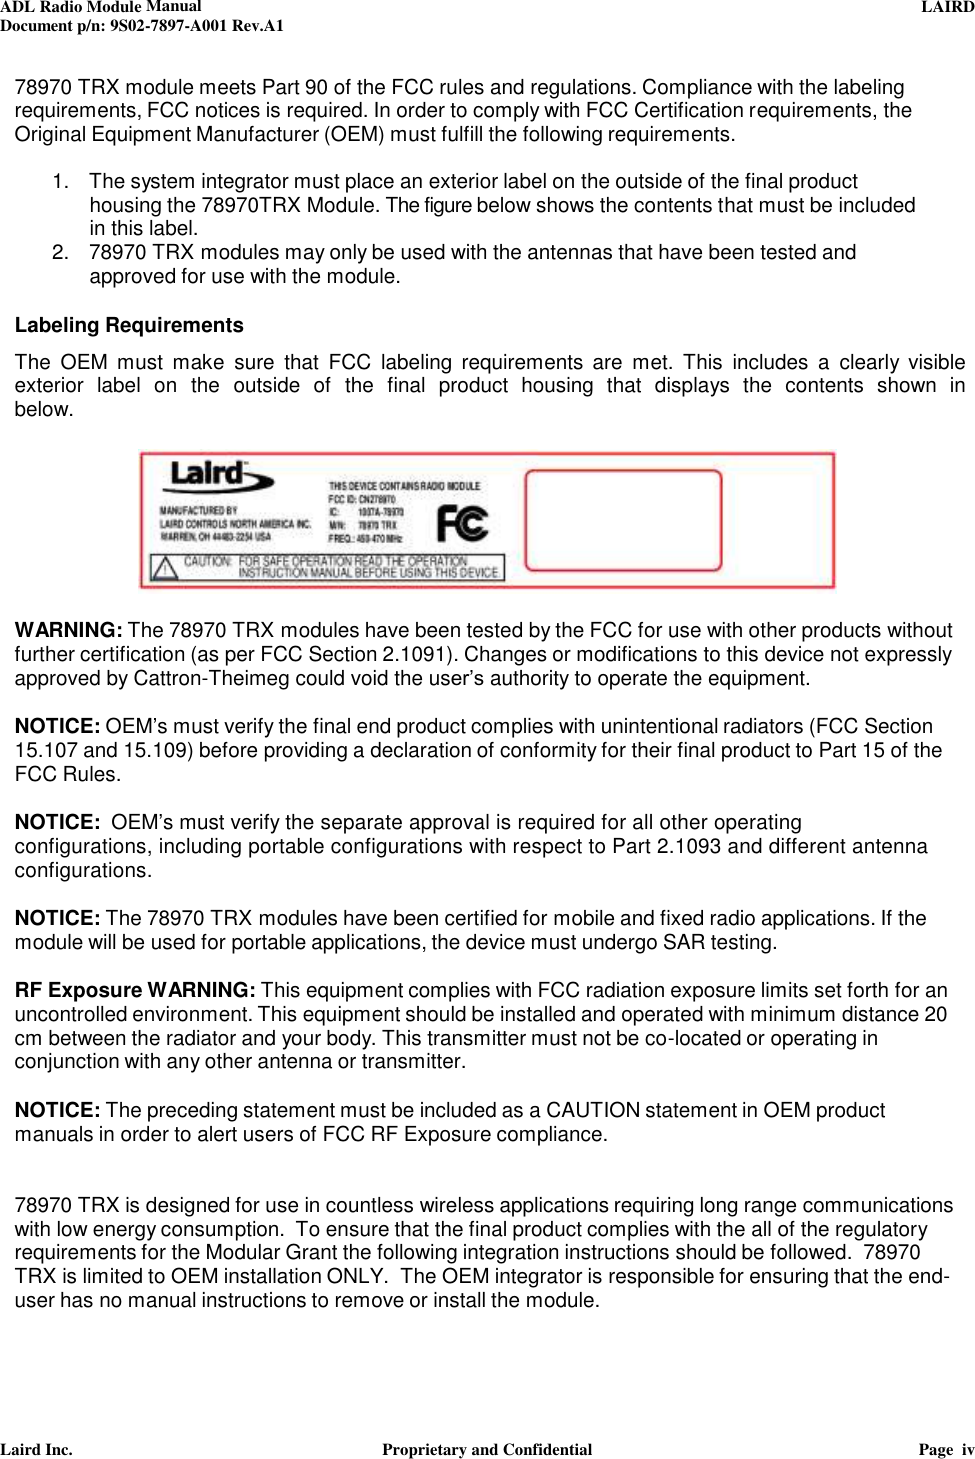 ADL Radio Module Manual     LAIRD  Document p/n: 9S02-7897-A001 Rev.A1   Laird Inc.  Proprietary and Confidential  Page  iv  78970 TRX module meets Part 90 of the FCC rules and regulations. Compliance with the labeling requirements, FCC notices is required. In order to comply with FCC Certification requirements, the Original Equipment Manufacturer (OEM) must fulfill the following requirements.  1.   The system integrator must place an exterior label on the outside of the final product housing the 78970TRX Module. The figure below shows the contents that must be included in this label. 2.   78970 TRX modules may only be used with the antennas that have been tested and approved for use with the module.   Labeling Requirements  The  OEM  must  make  sure  that  FCC  labeling  requirements  are  met.  This  includes  a  clearly visible exterior  label  on  the  outside of the  final  product  housing  that  displays  the  contents  shown  in below.    WARNING: The 78970 TRX modules have been tested by the FCC for use with other products without further certification (as per FCC Section 2.1091). Changes or modifications to this device not expressly approved by Cattron-Theimeg could void the user’s authority to operate the equipment.  NOTICE: OEM’s must verify the final end product complies with unintentional radiators (FCC Section 15.107 and 15.109) before providing a declaration of conformity for their final product to Part 15 of the FCC Rules.  NOTICE:  OEM’s must verify the separate approval is required for all other operating configurations, including portable configurations with respect to Part 2.1093 and different antenna configurations.   NOTICE: The 78970 TRX modules have been certified for mobile and fixed radio applications. If the module will be used for portable applications, the device must undergo SAR testing.  RF Exposure WARNING: This equipment complies with FCC radiation exposure limits set forth for an uncontrolled environment. This equipment should be installed and operated with minimum distance 20 cm between the radiator and your body. This transmitter must not be co-located or operating in conjunction with any other antenna or transmitter.  NOTICE: The preceding statement must be included as a CAUTION statement in OEM product manuals in order to alert users of FCC RF Exposure compliance.   78970 TRX is designed for use in countless wireless applications requiring long range communications with low energy consumption.  To ensure that the final product complies with the all of the regulatory requirements for the Modular Grant the following integration instructions should be followed.  78970 TRX is limited to OEM installation ONLY.  The OEM integrator is responsible for ensuring that the end-user has no manual instructions to remove or install the module.   